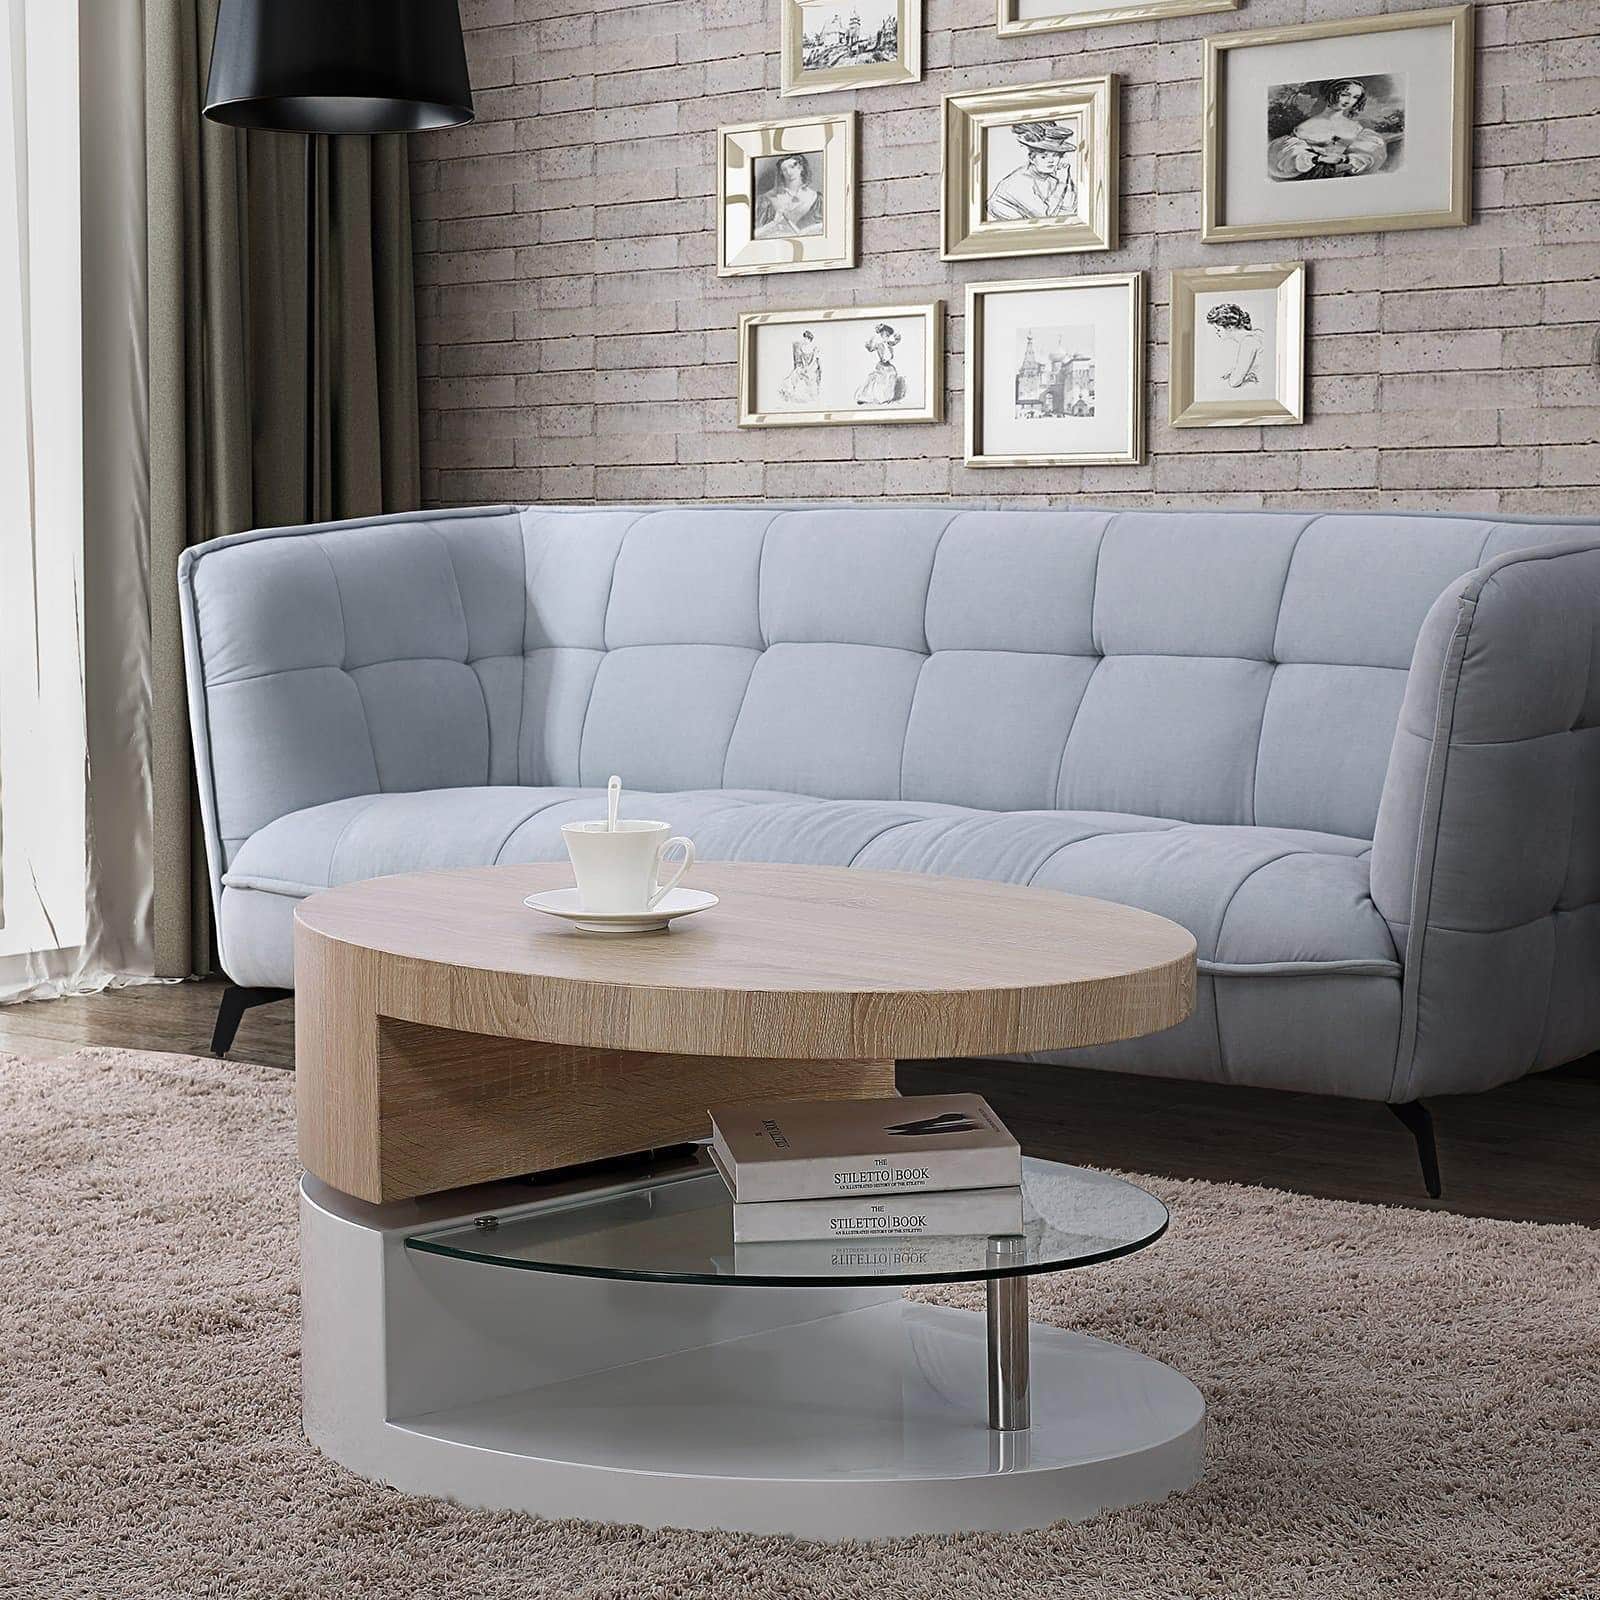 Shop here mecor swivel coffee table oval 360 degree rotating modern side end sofa tea table with glass 3 layers wood glass mdf living room office furniture